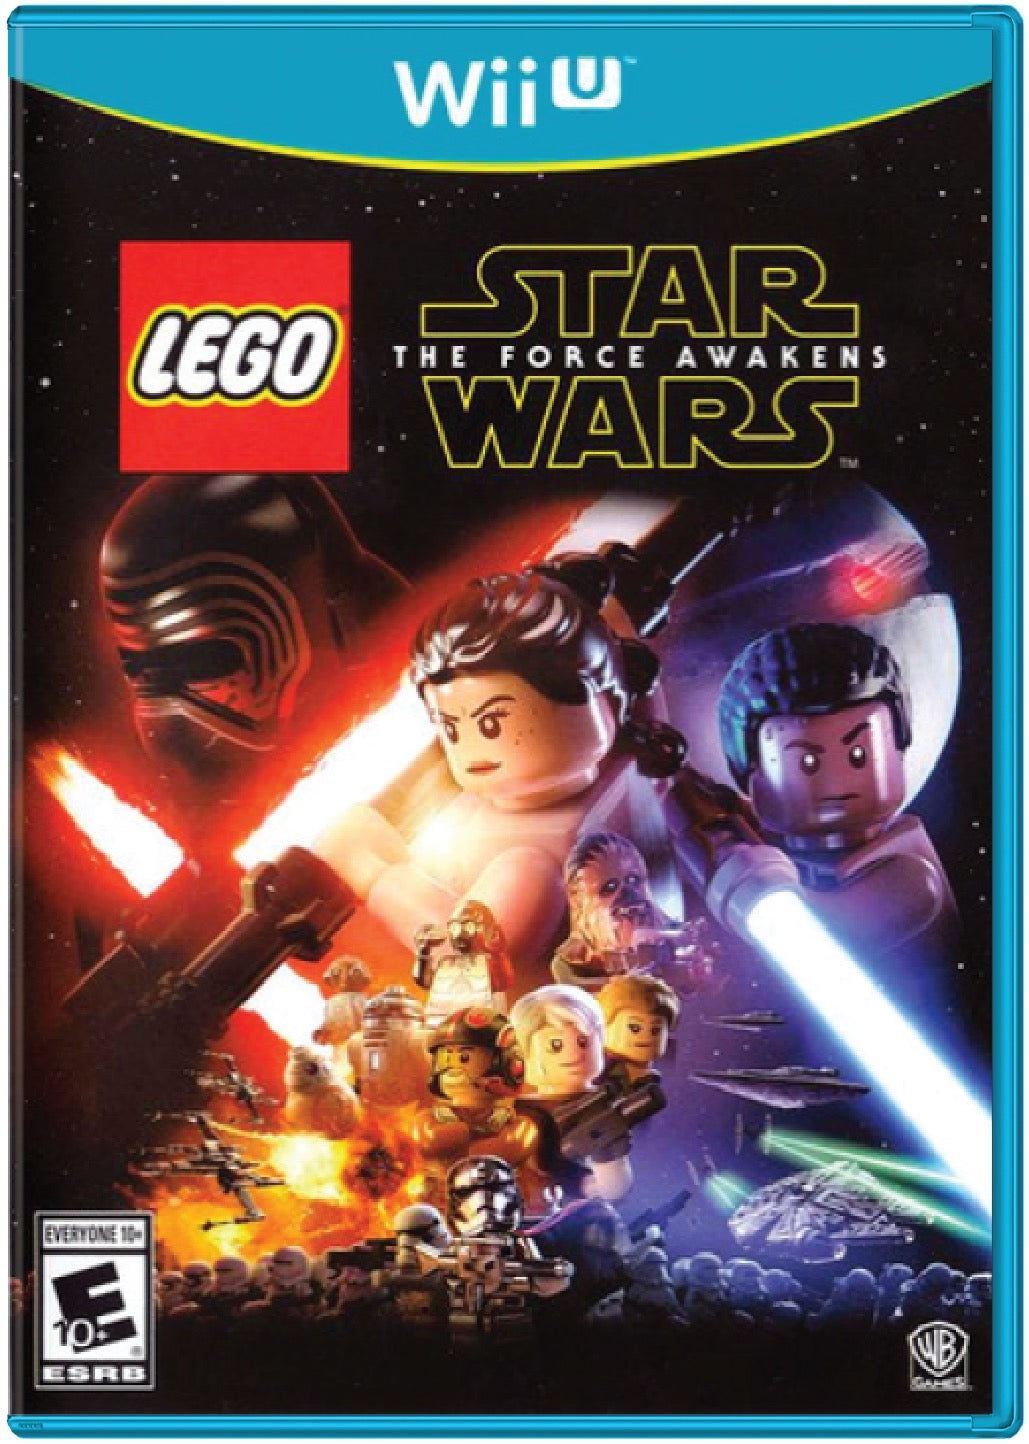 LEGO Star Wars The Force Awakens Cover Art and Product Photo